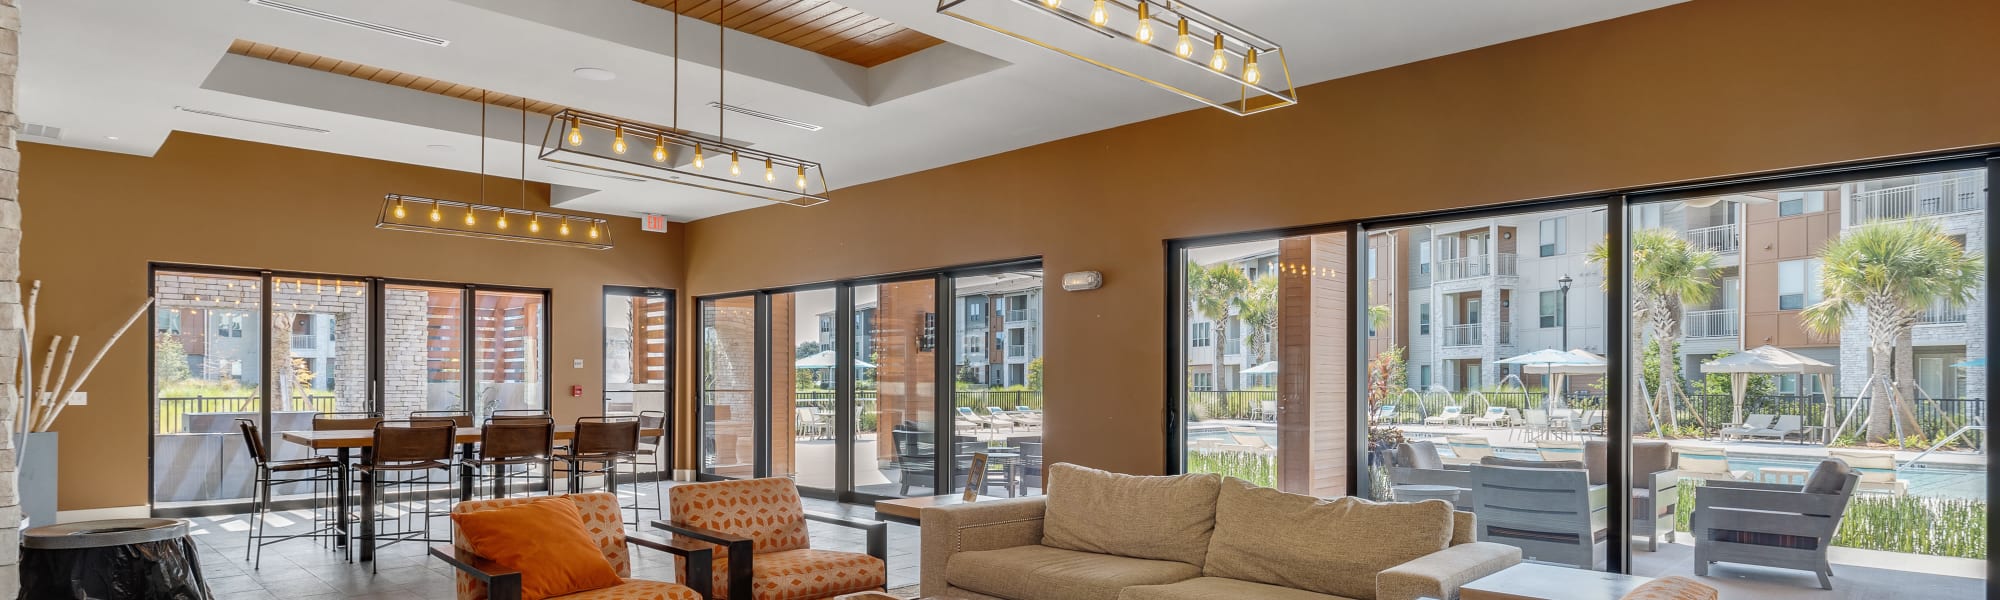 Resident resources at The Point at Town Center in Jacksonville, Florida